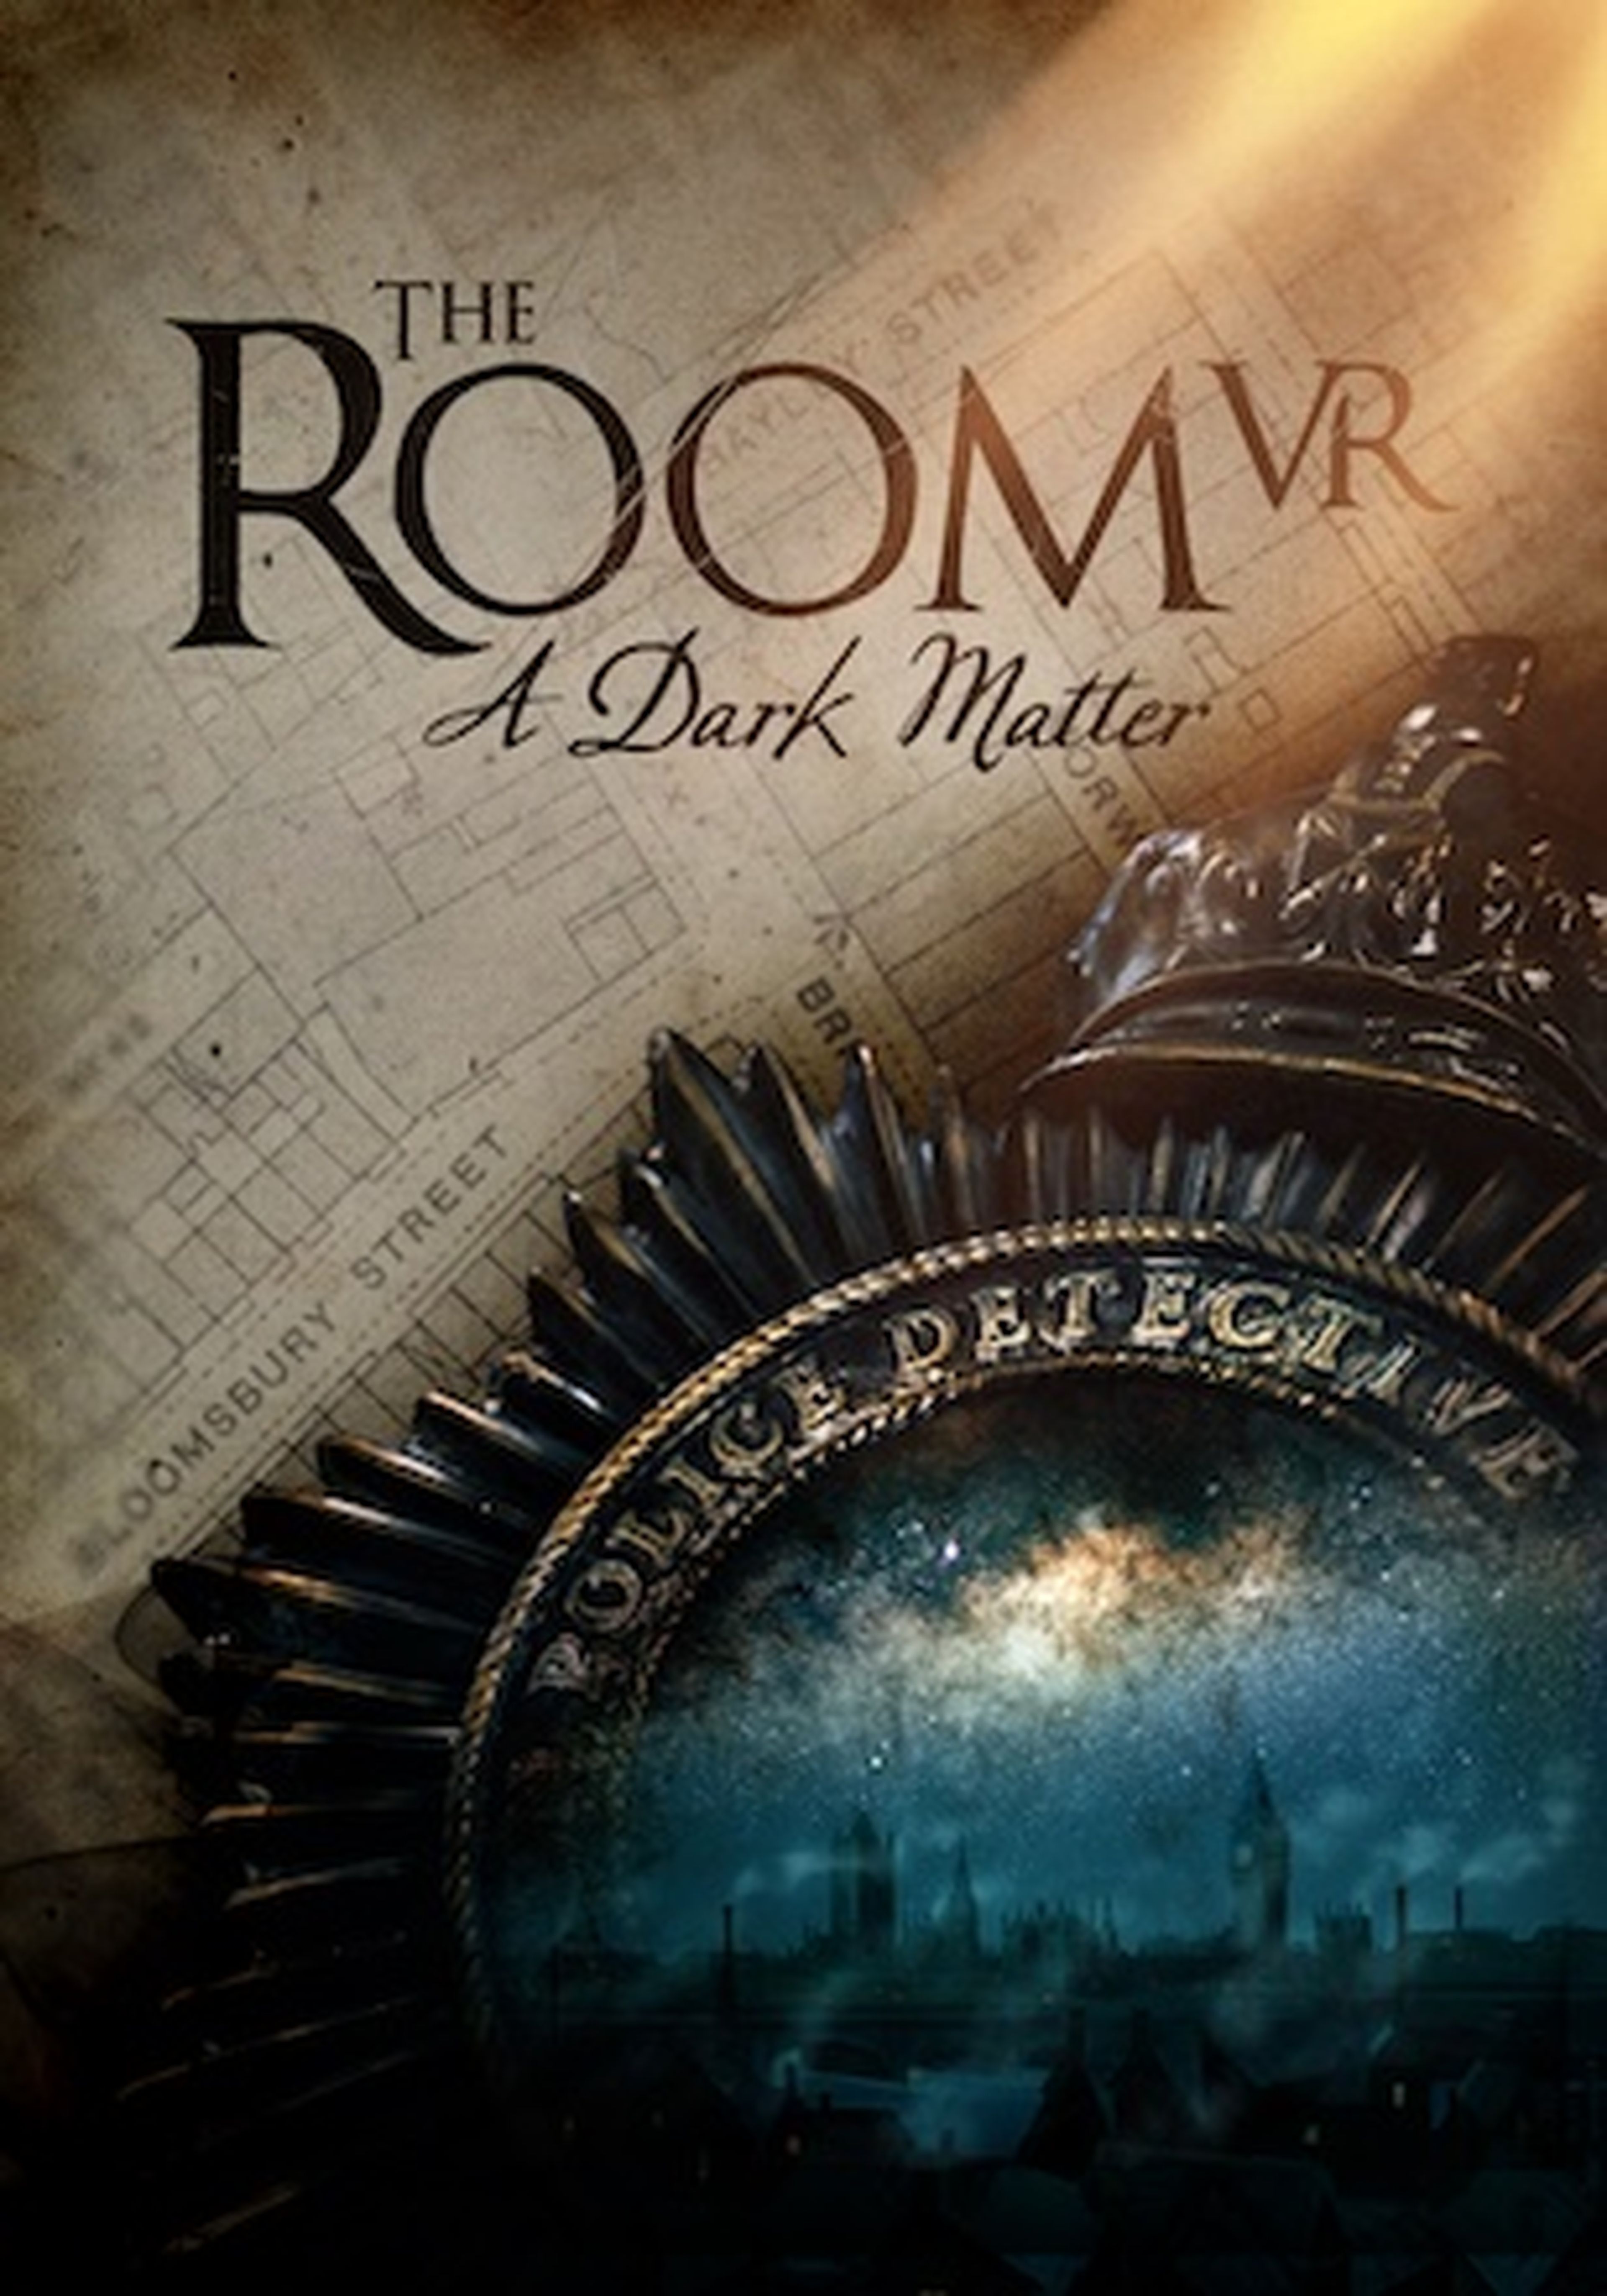 The room poster. The Room VR: A Dark matter. VR Room. The Room (игра). VR игра Room.